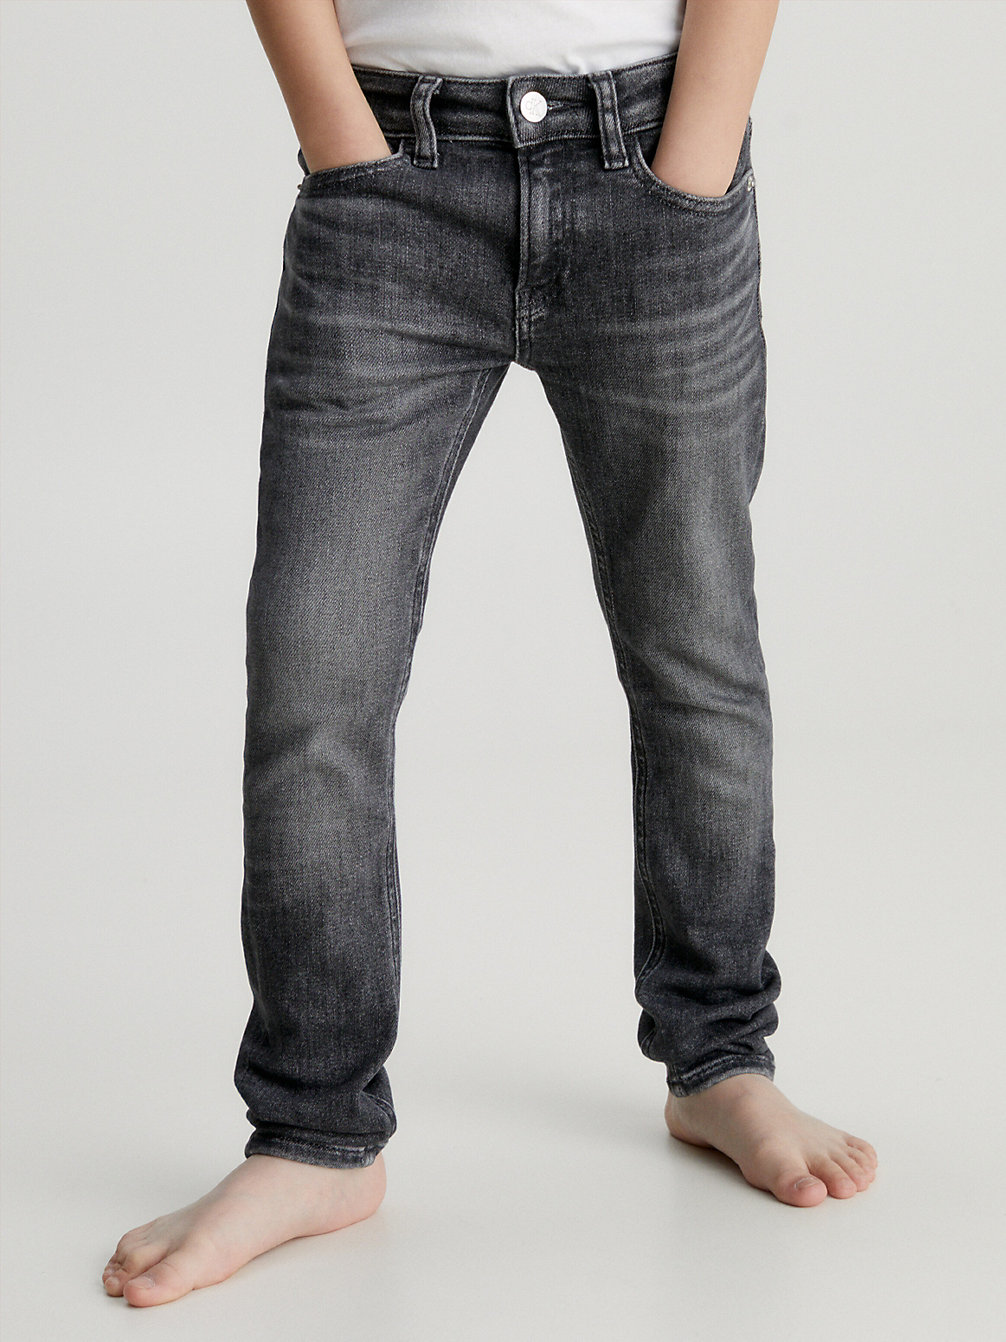 MID GREY Mid Rise Skinny Jeans undefined boys Calvin Klein